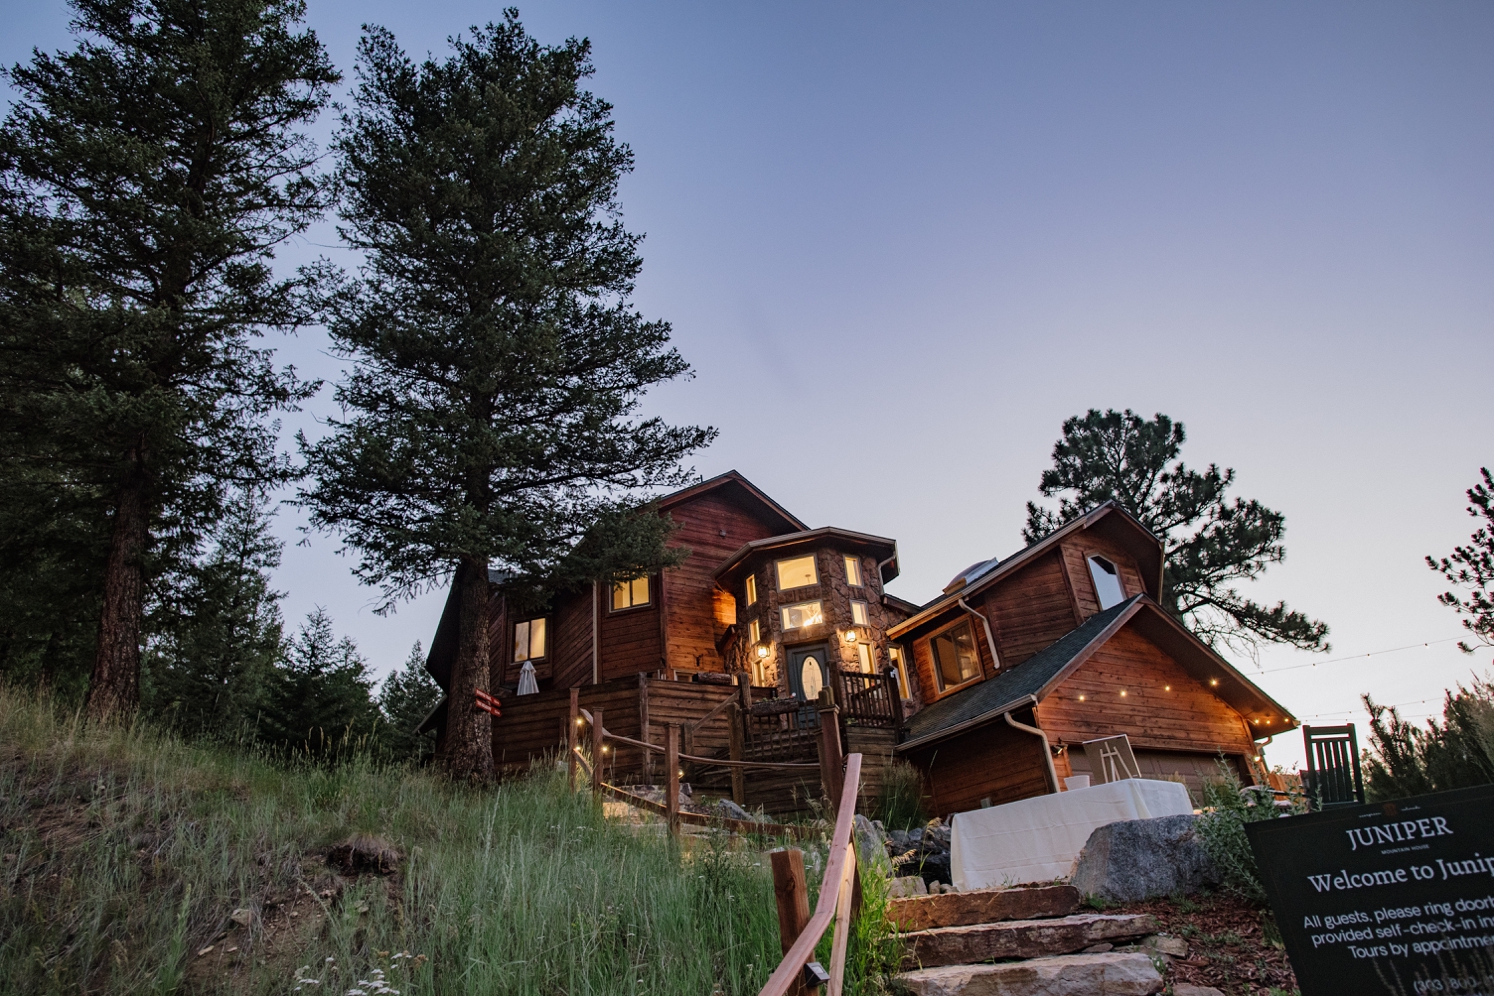 Juniper Mountain House lit up at sunset | McArthur Weddings and Events